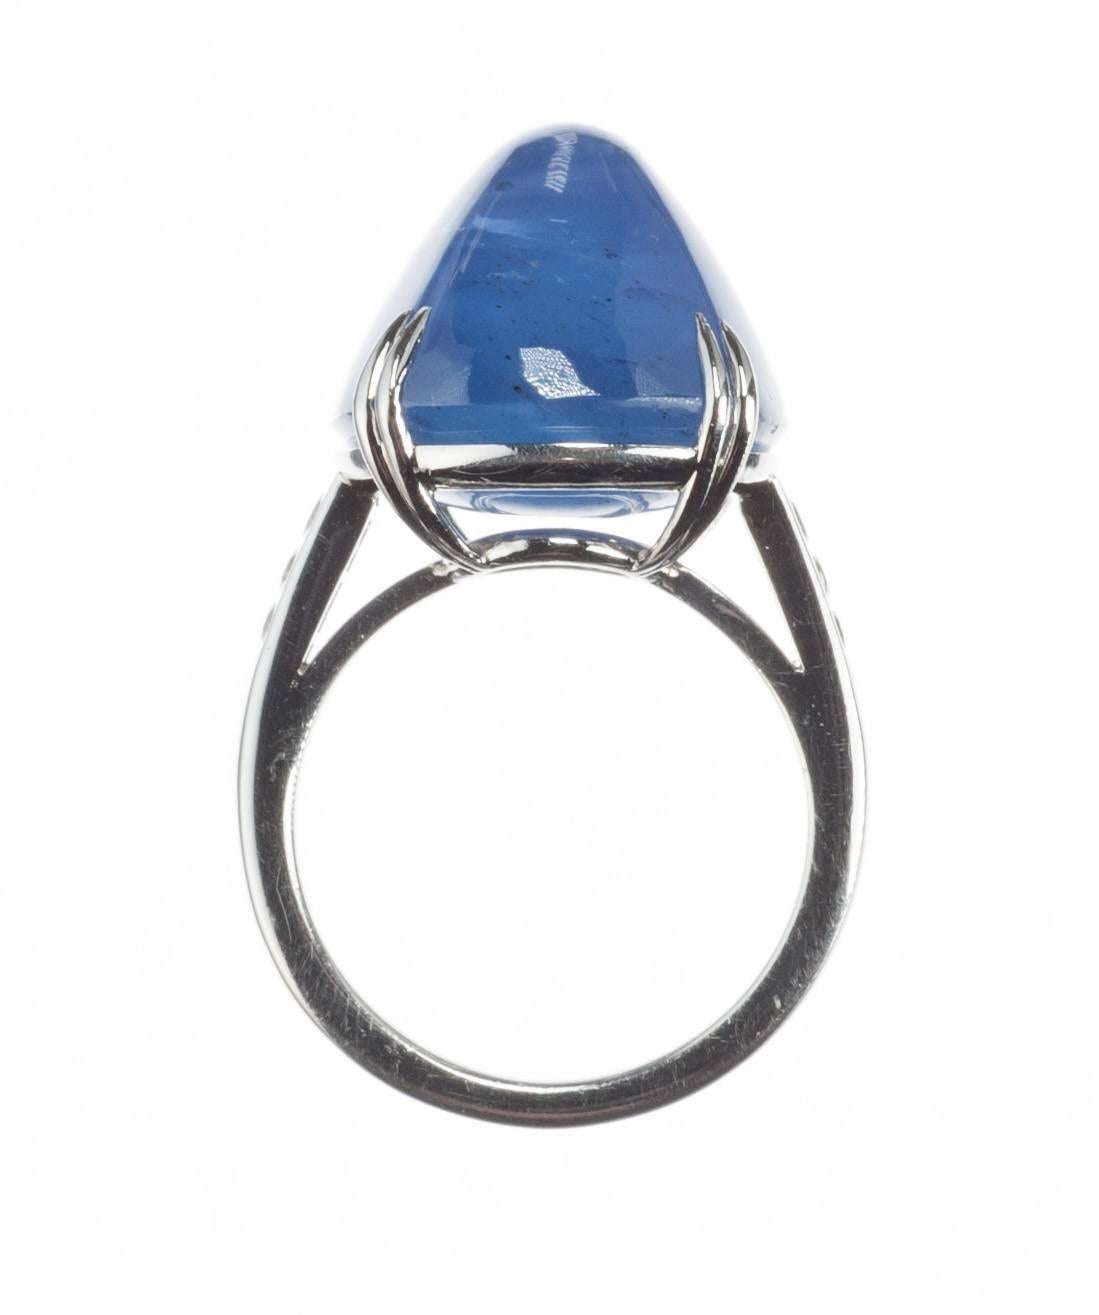 Lucie Campbell Sugarloaf-Cut Sapphire Diamond Platinum Ring In New Condition For Sale In Saint Louis, MO